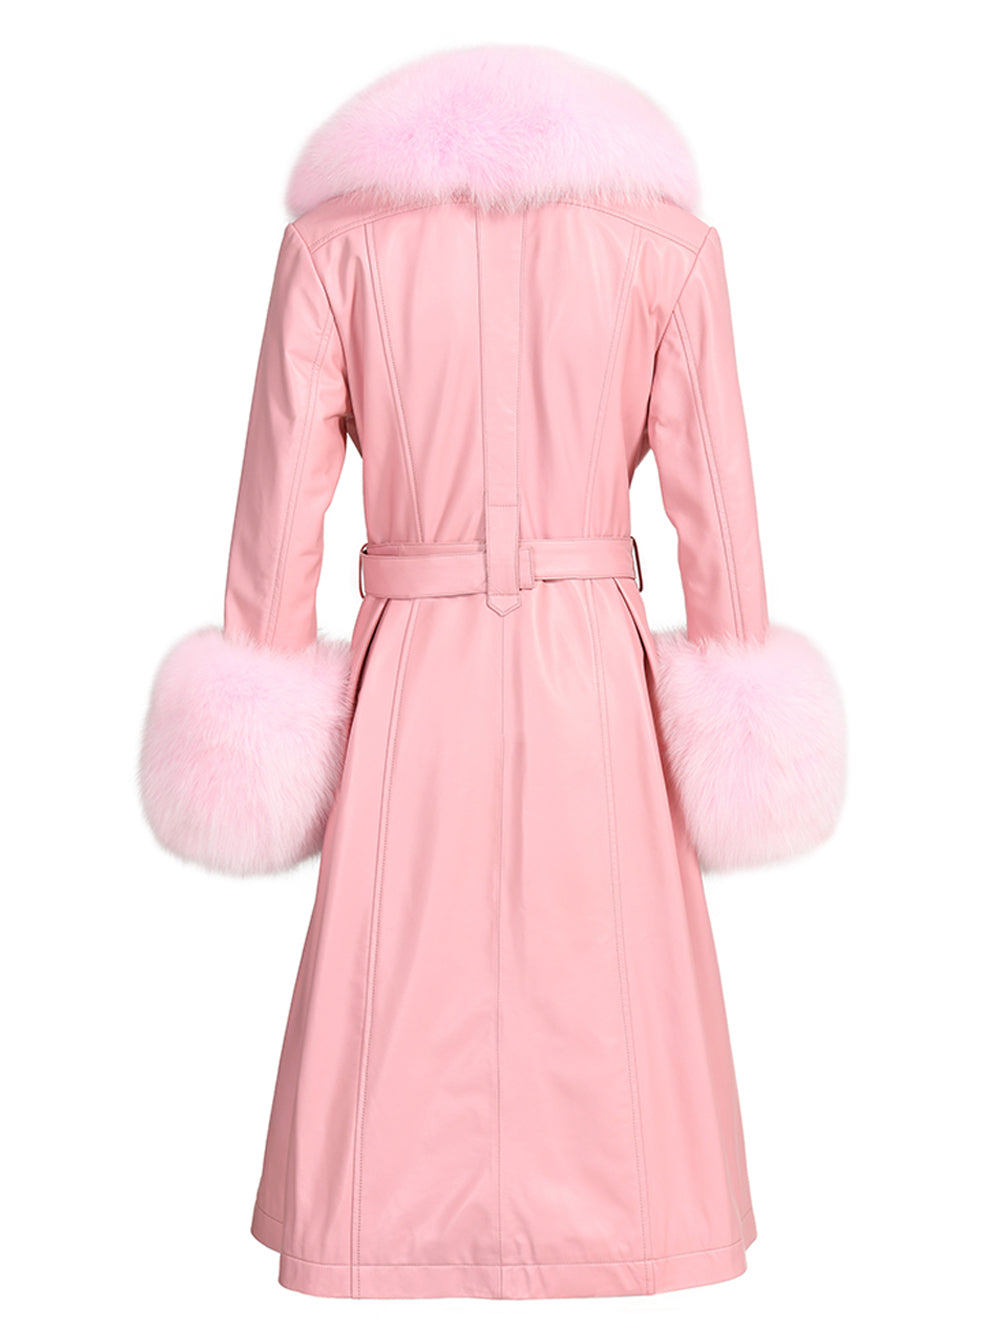 Fur Foxy Leather Coat in Light Pink